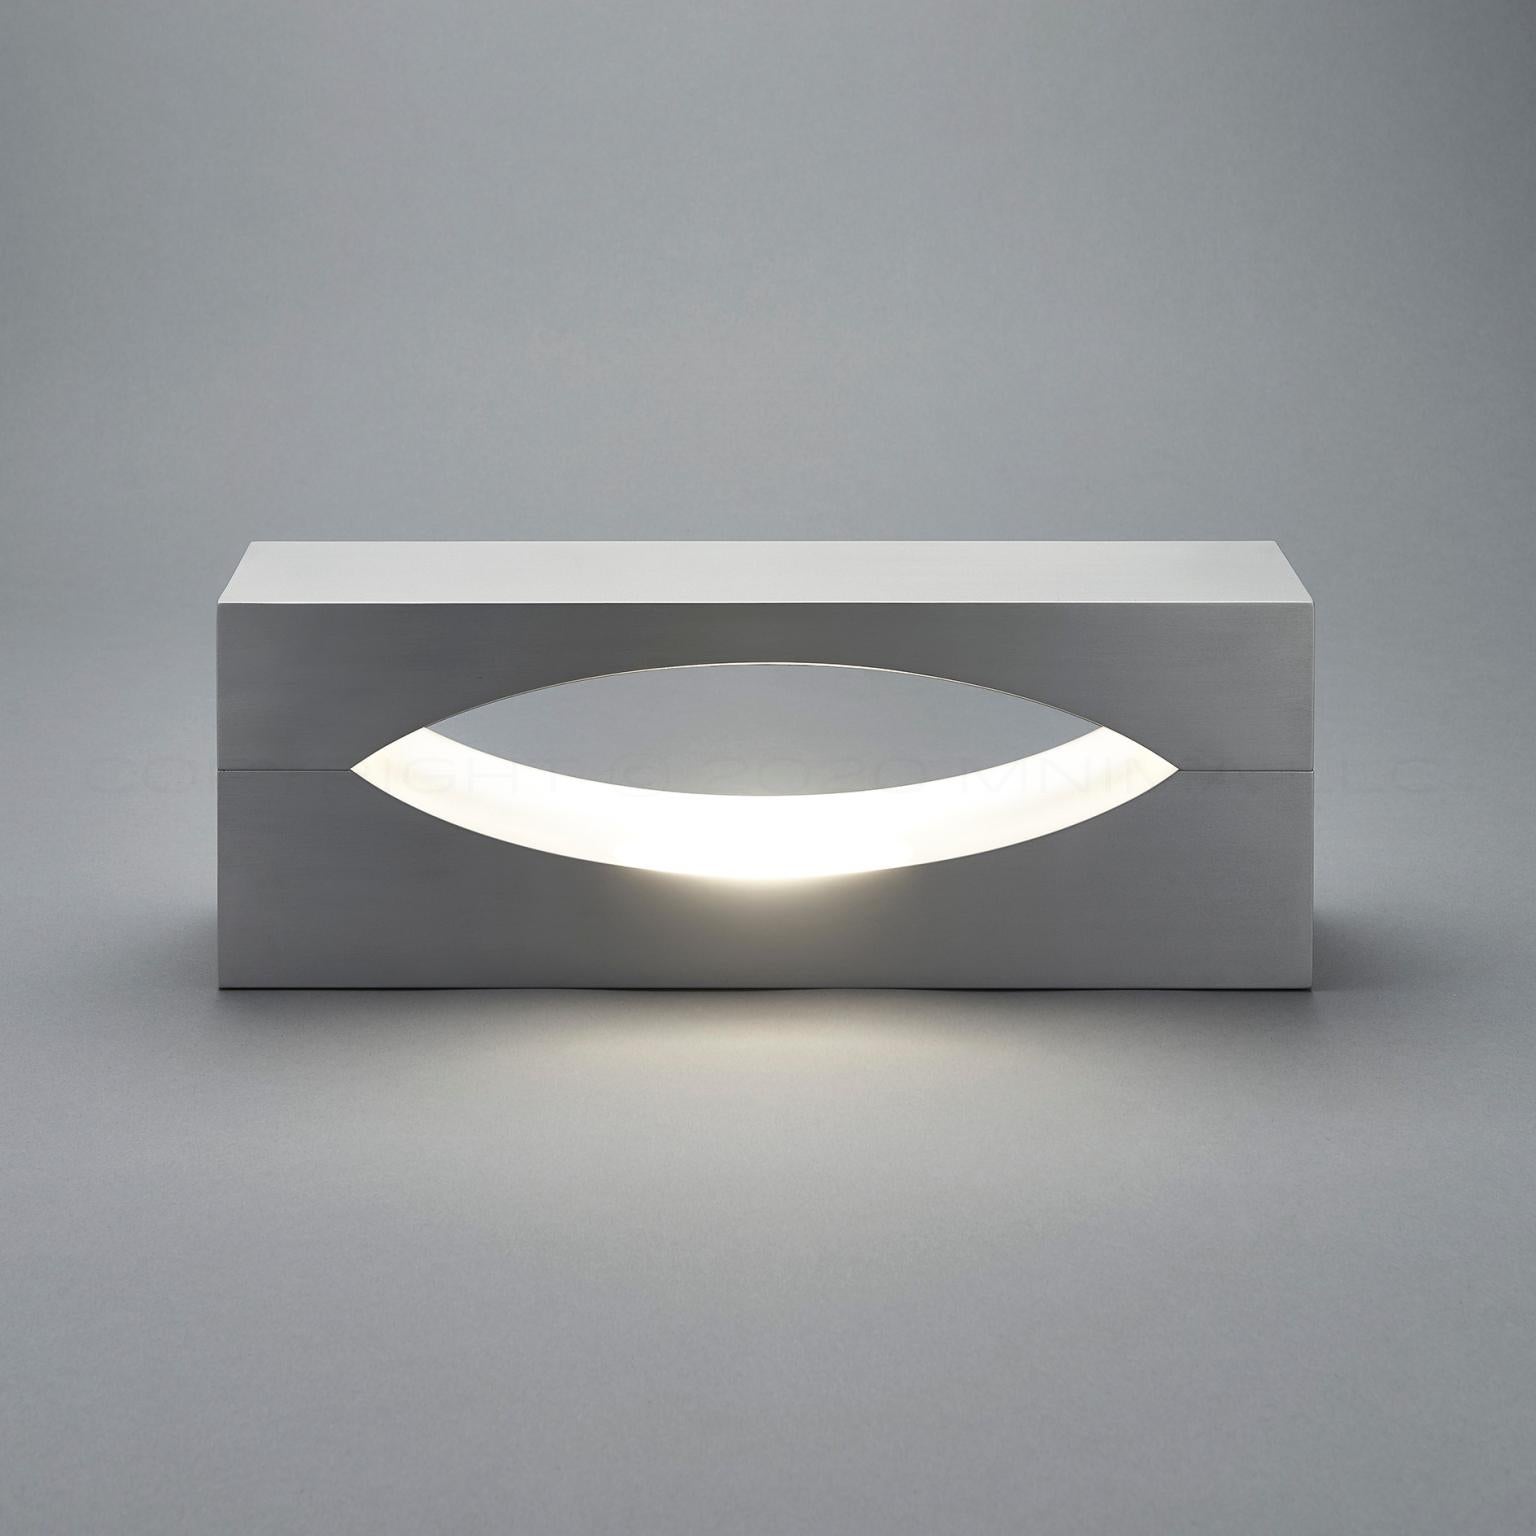 Snakke by mnima. A table light sculpted from solid aluminum. Light illuminates the center cavity before gently spilling into its environment. Modern. Minimal.

Physical
material 6061 aluminum
finish clear anodize shown
weight